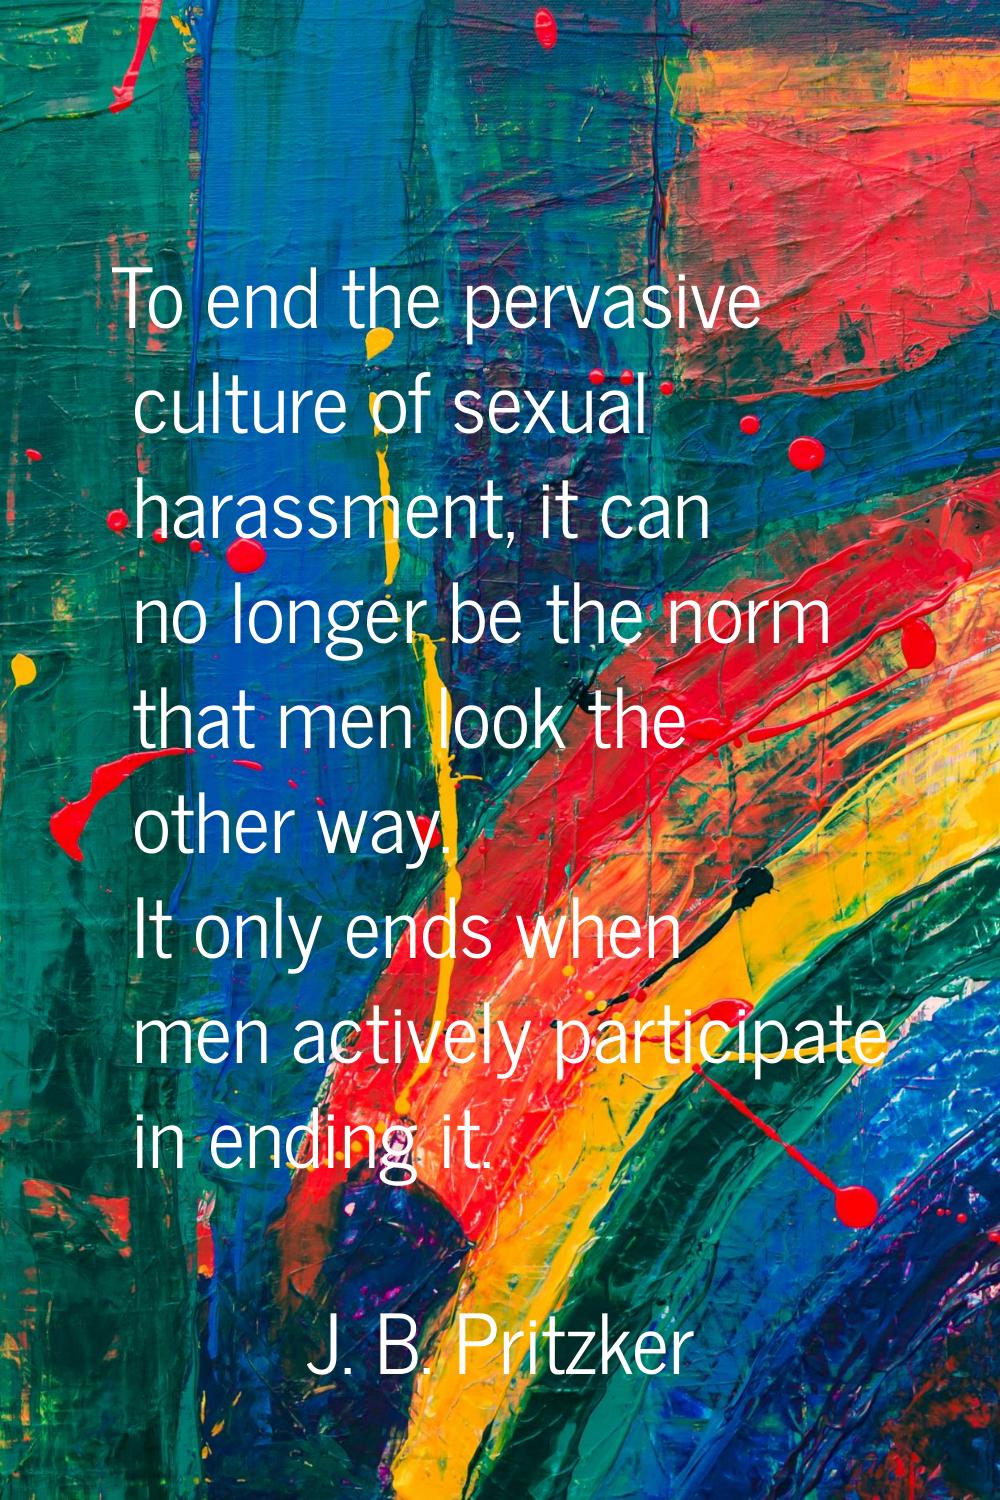 To end the pervasive culture of sexual harassment, it can no longer be the norm that men look the o